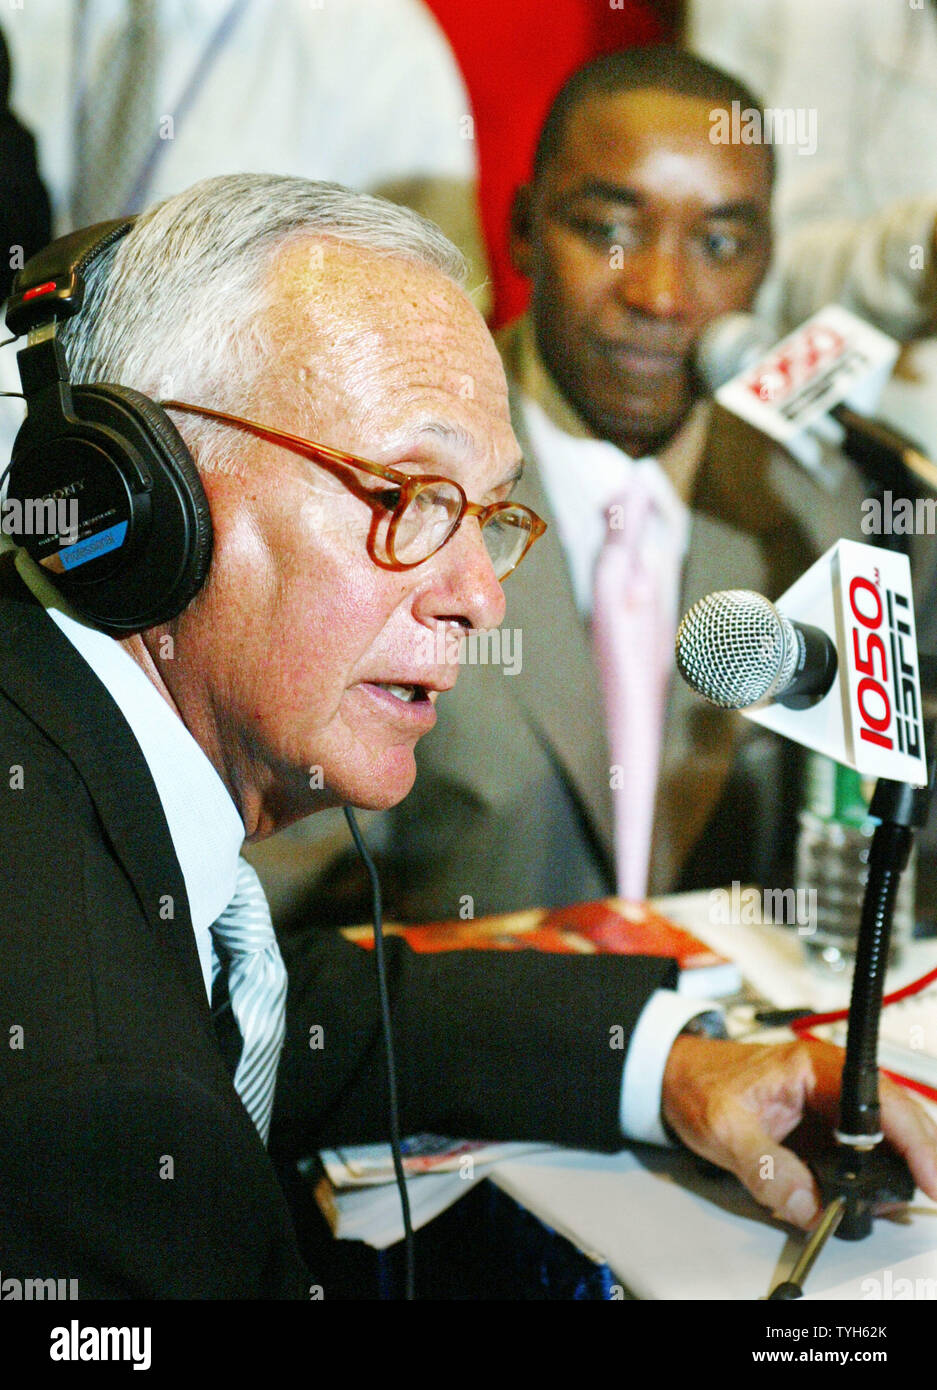 Basketball Hall of Famer Larry Brown, left, talks about his new possition as head coach for the New York Knicks' as the team's president Isiah Thomas listnes during a radio interview following a press conference at Madison Square Garden on July 28, 2005 in New York City. Brown, former coach for the Detroit Pistons, will be the highest paid basketball coach ever, receiving over $10 million a year.  (UPI Photo/Monika Graff) Stock Photo